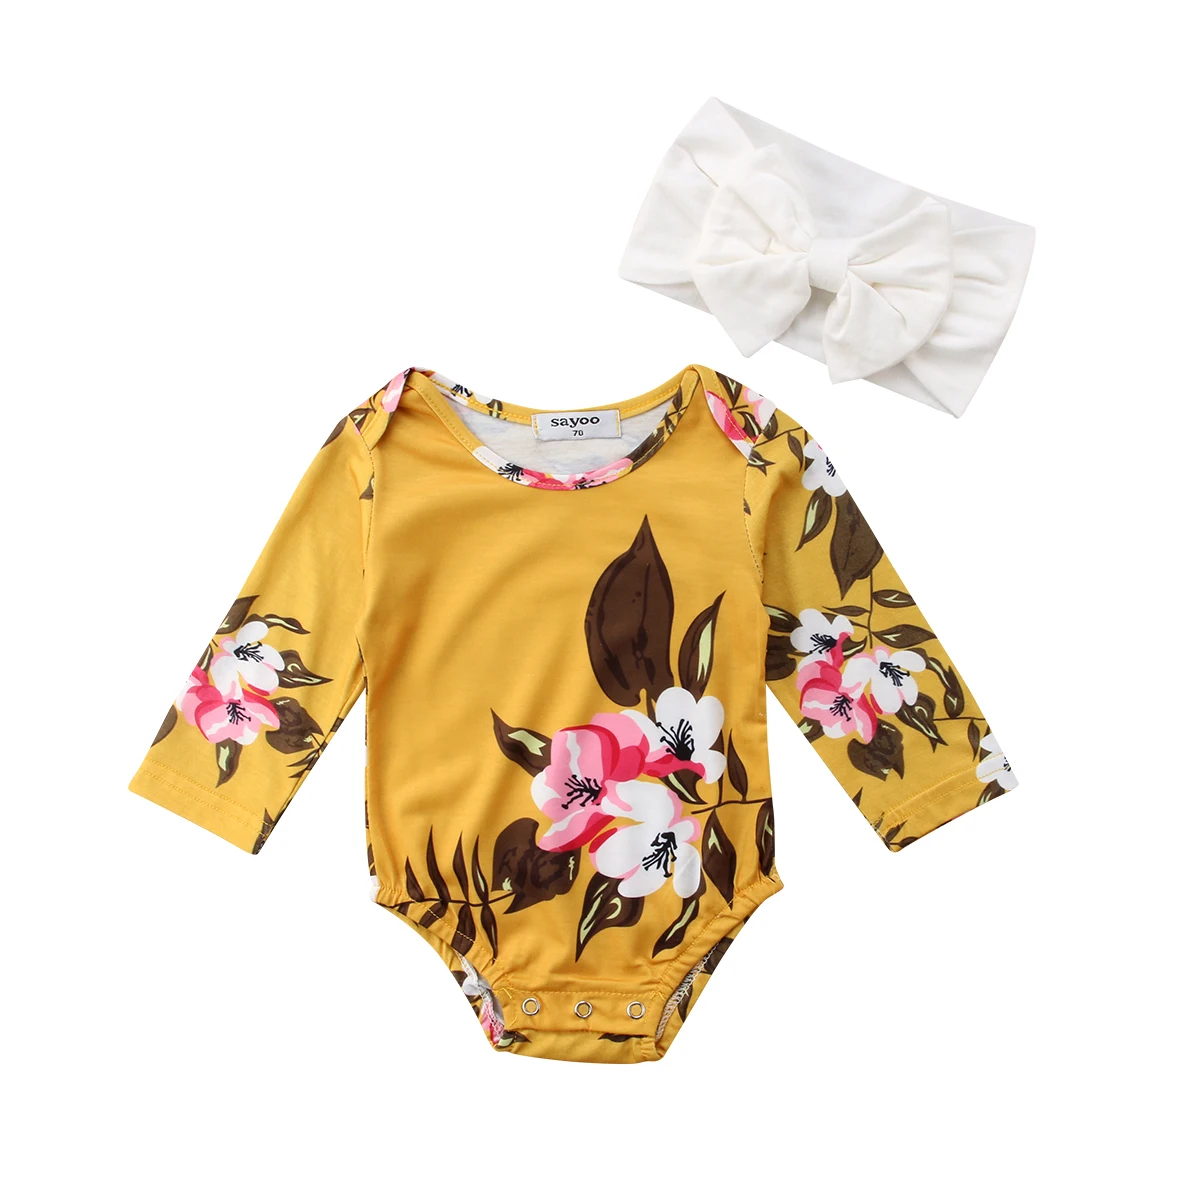 Pudcoco Brand Newborn Baby Girl Floral Romper Jumpsuit Long Sleeve Casual Princess Baby Girl Clothes With Headband - Цвет: Светло-желтый